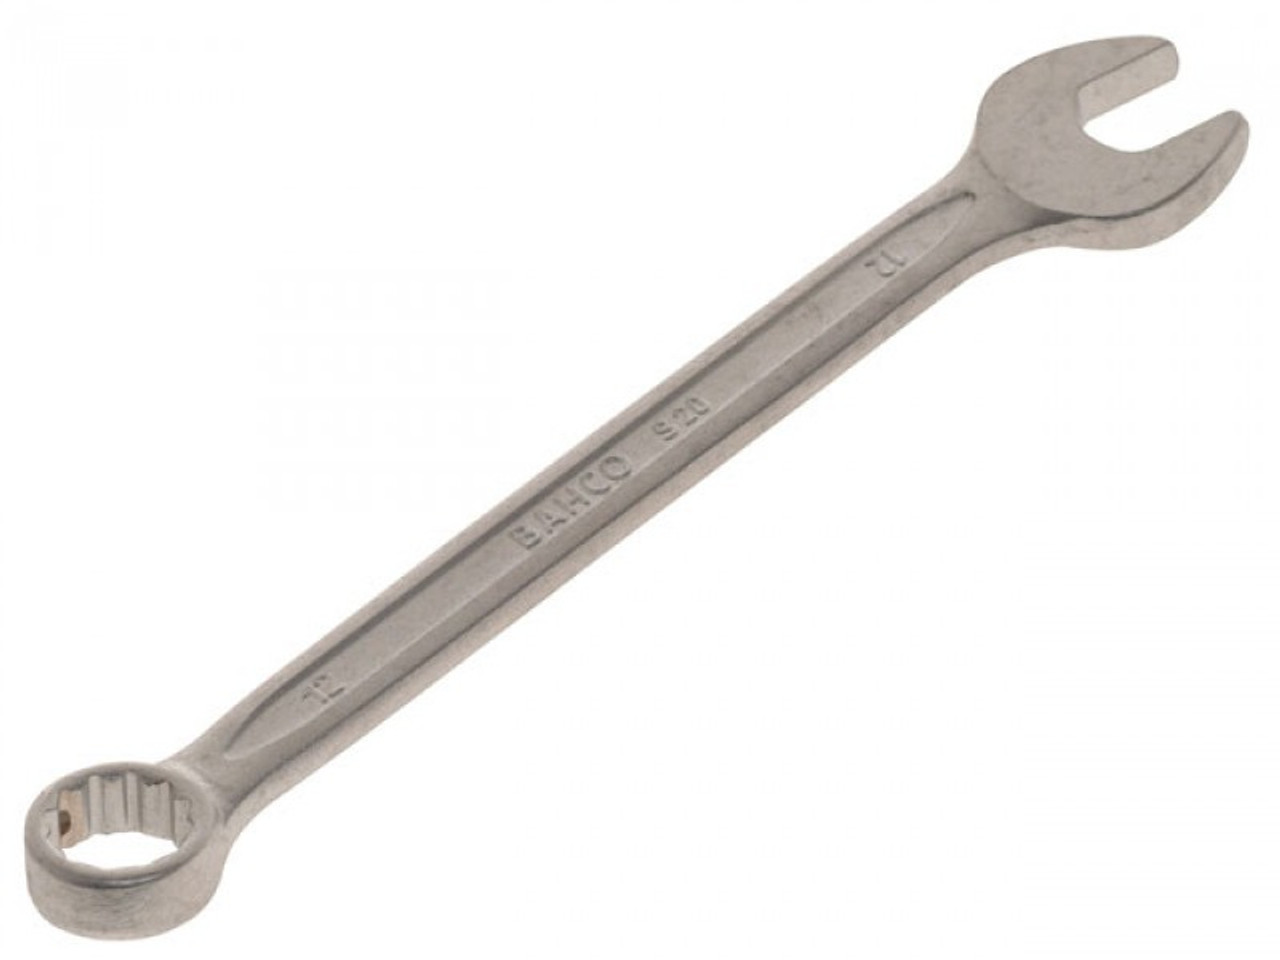 IMPA 616130 WRENCH OPEN & 12-POINT BOX METRIC 7mm  TRANSTIME